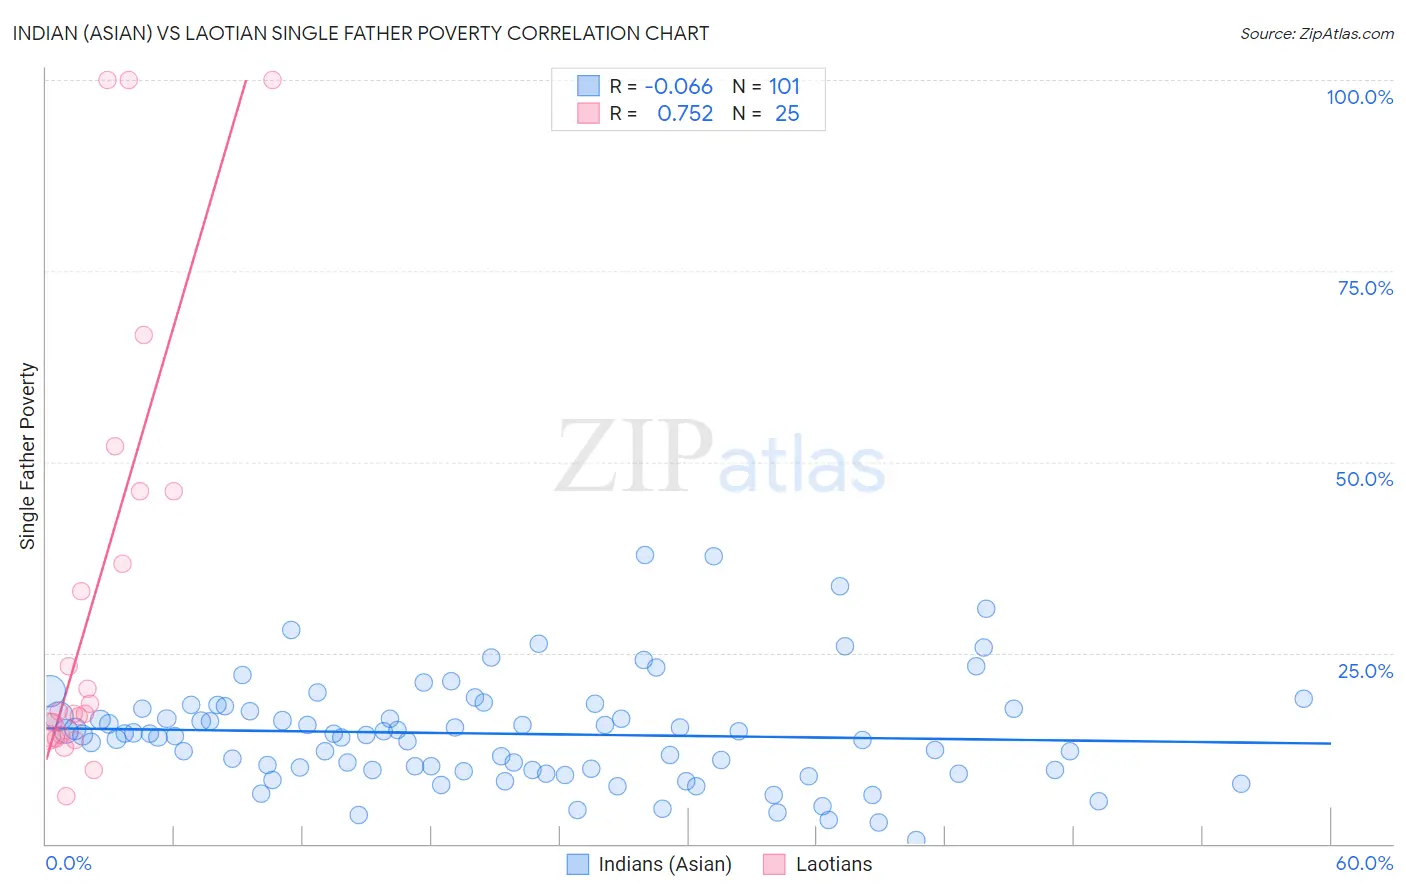 Indian (Asian) vs Laotian Single Father Poverty